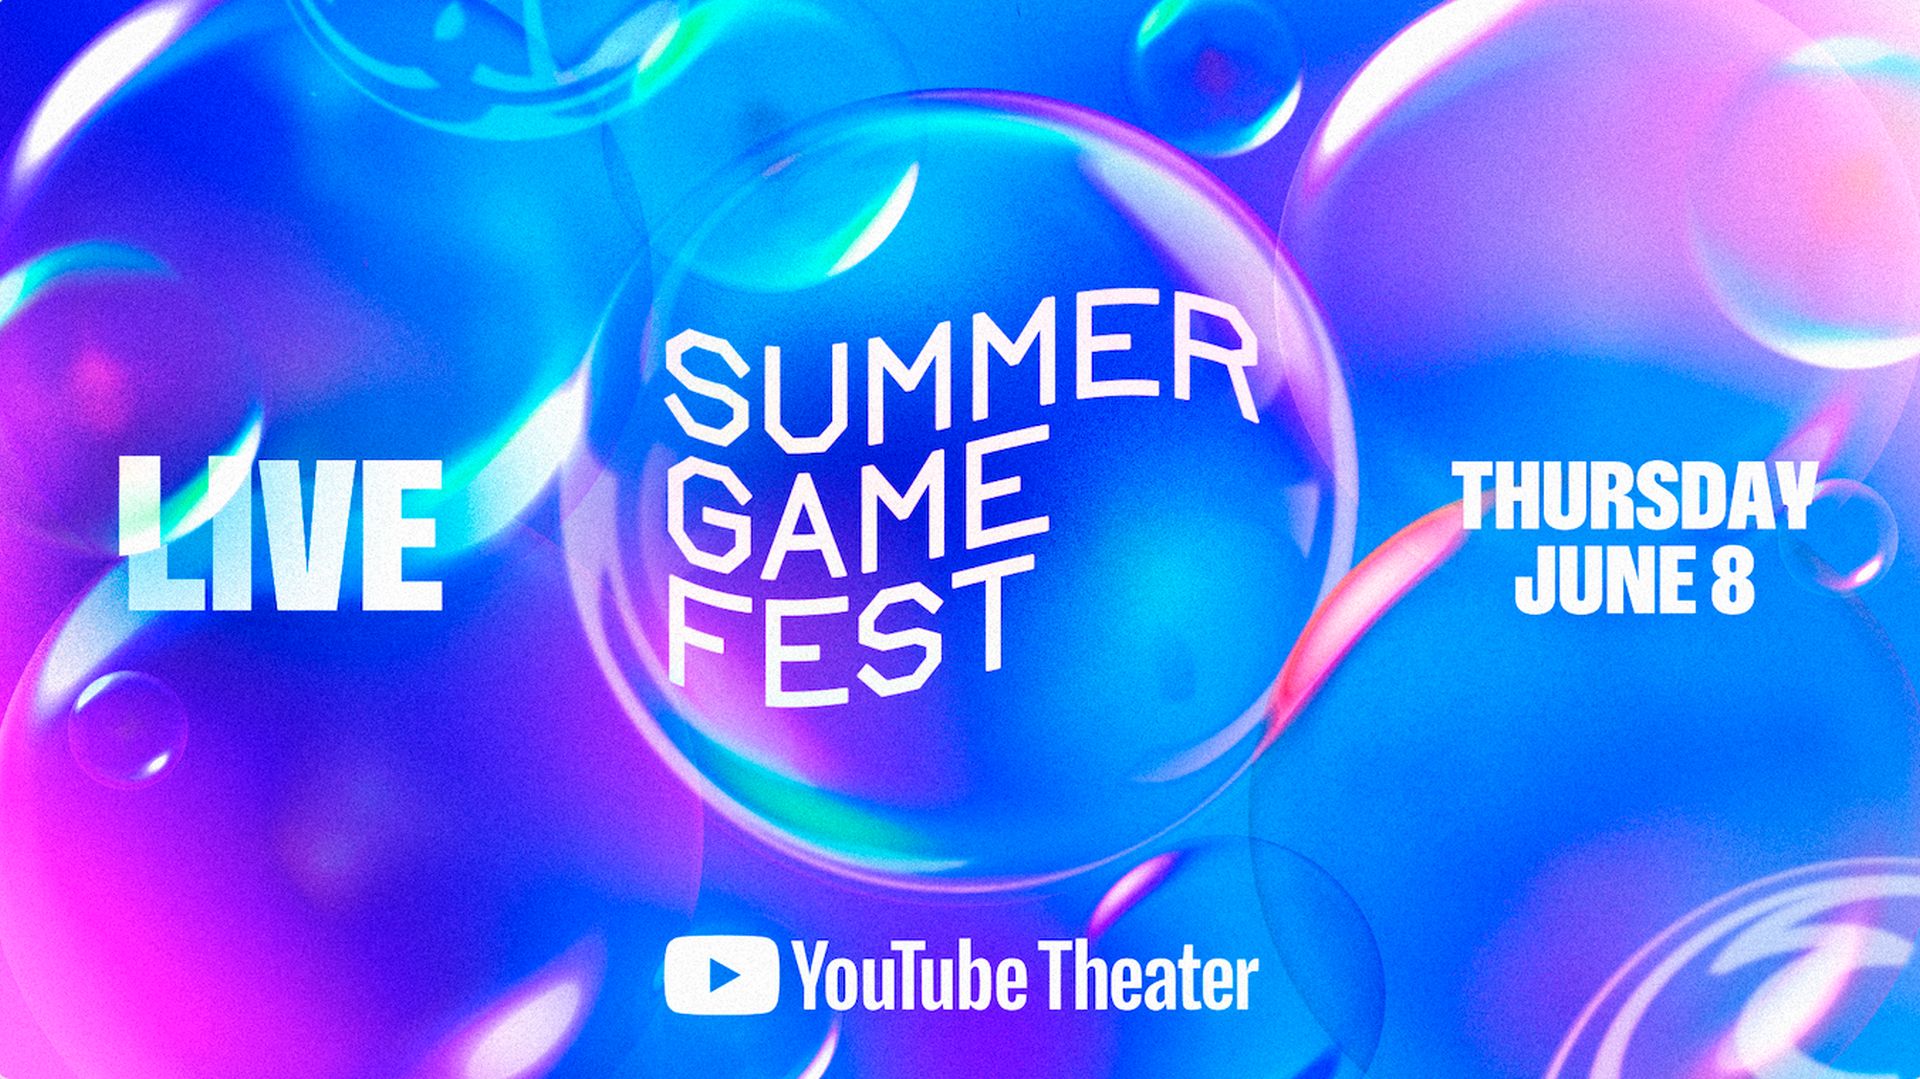 Summer Game Fest will kickoff with a live audience in 2023